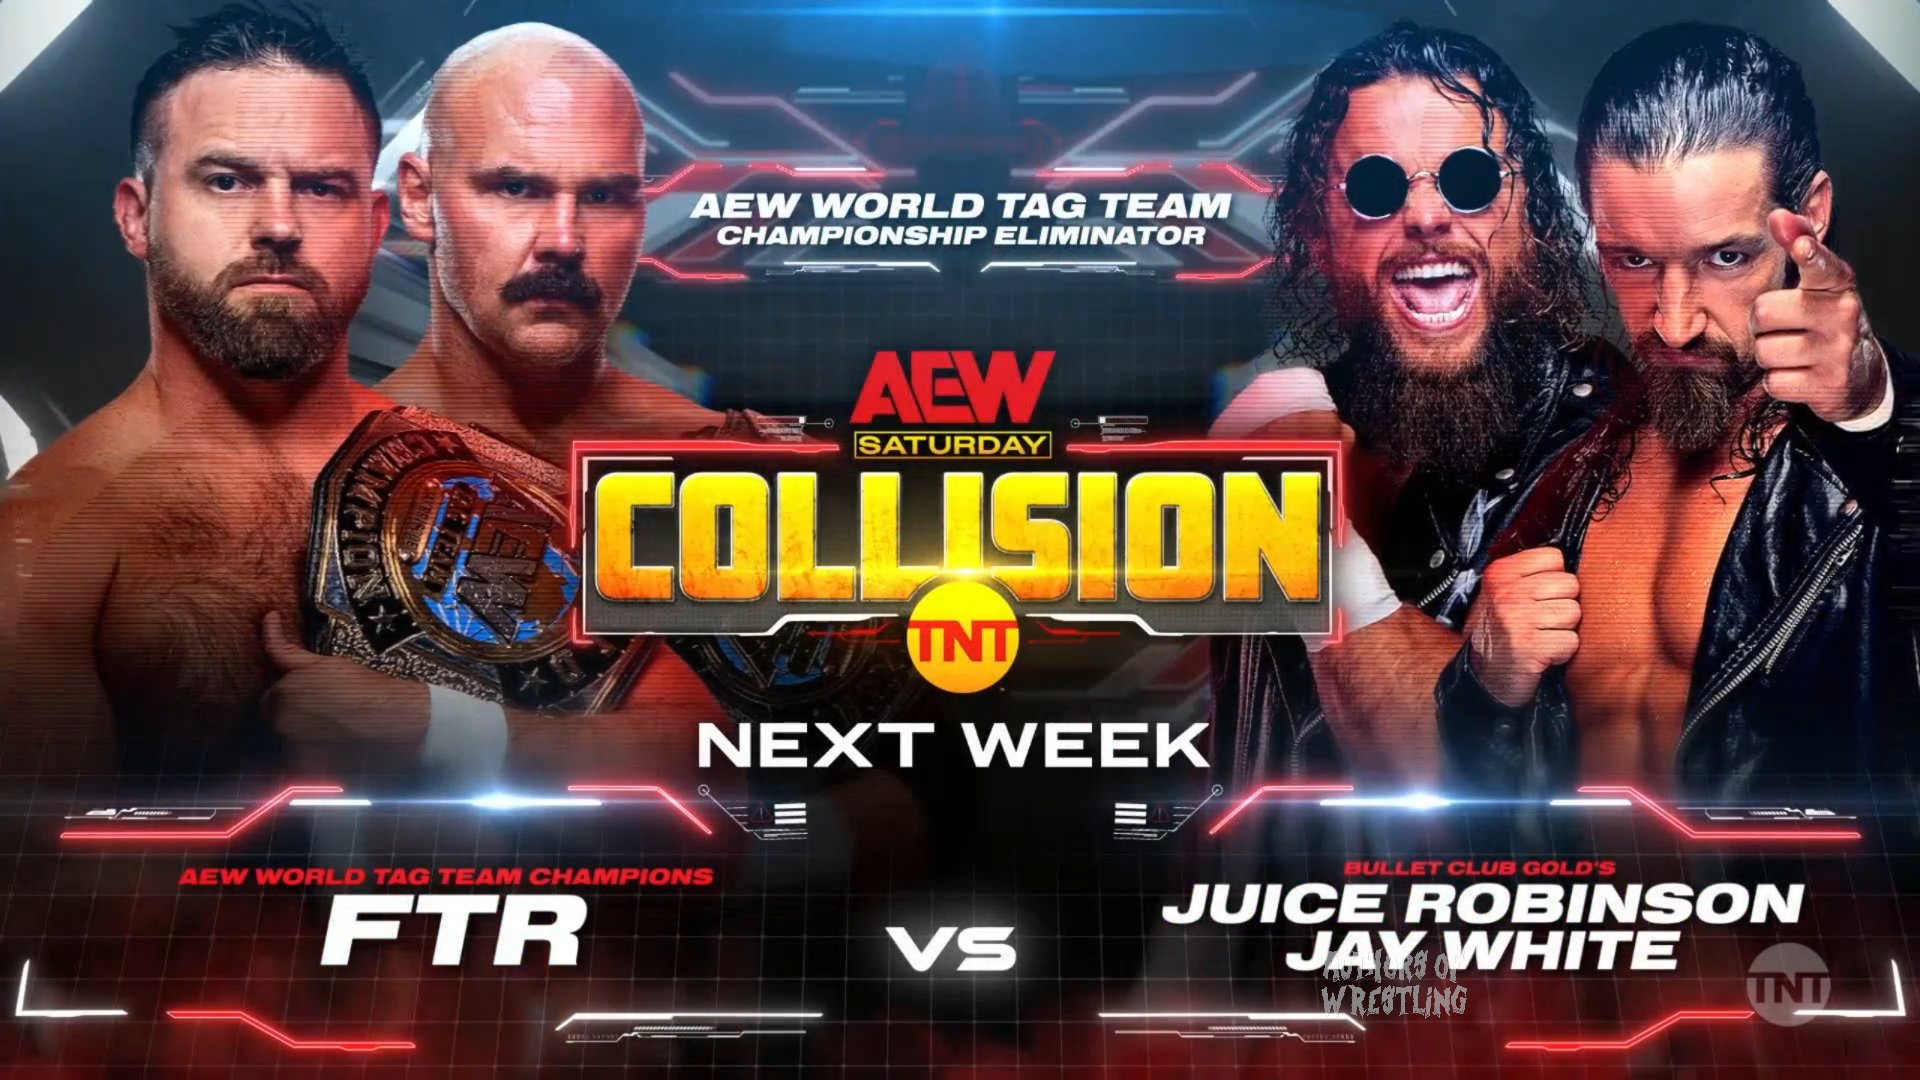 Early Lineup For July 8th Edition Of AEW Collision